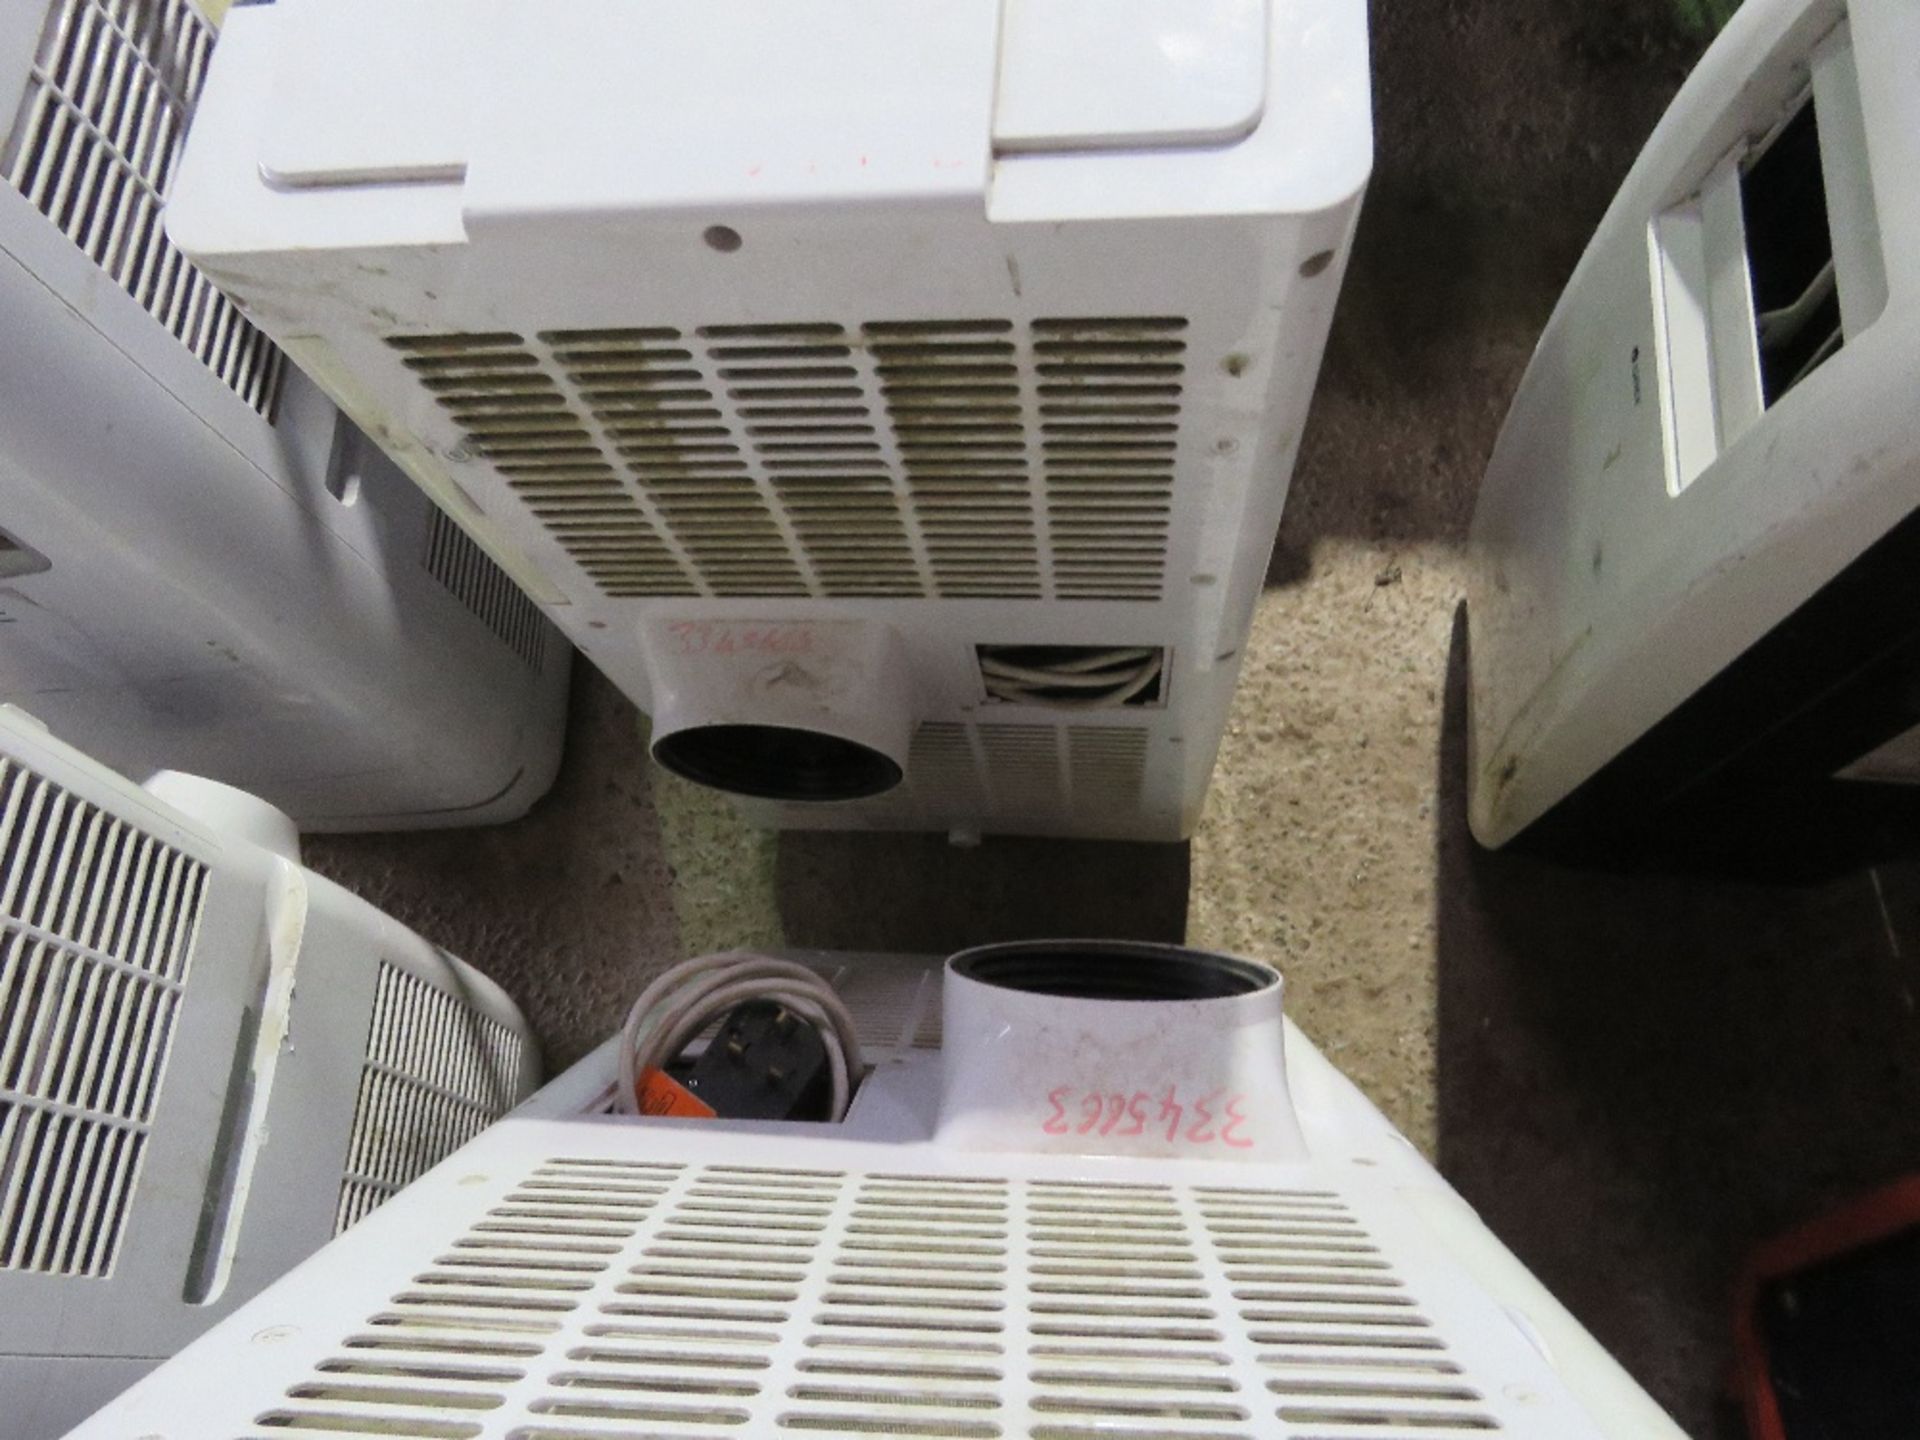 2 X ROOM AIR CONDITIONERS, 240VOLT POWERED. - Image 2 of 3